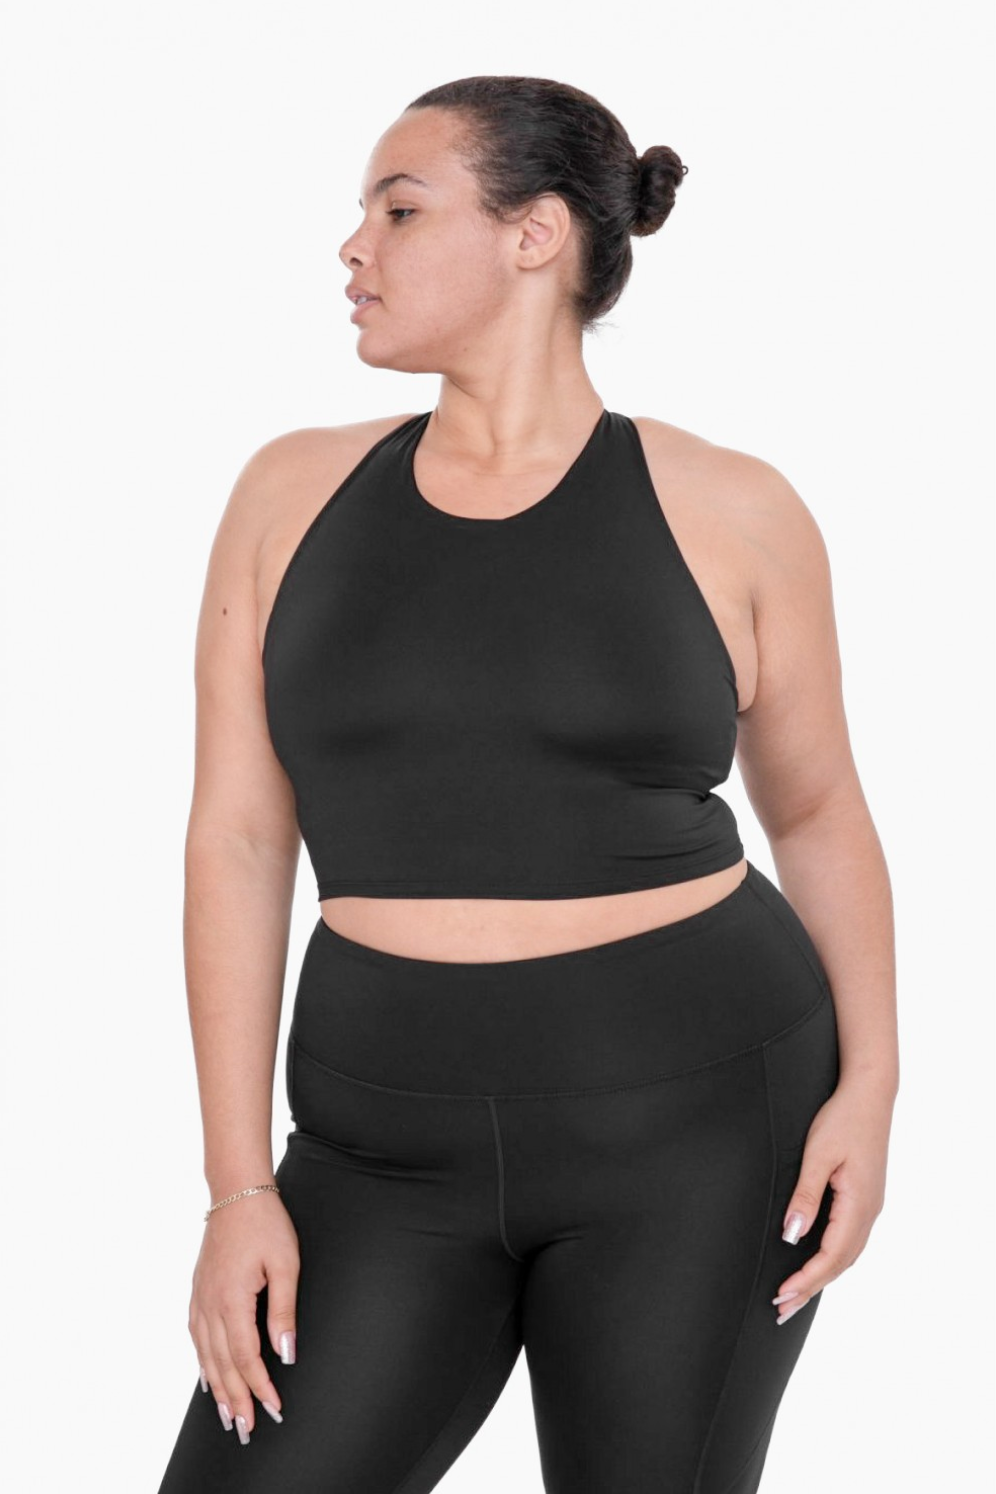 CURVY Strap Back Cropped Top with Built-In Sports Bra